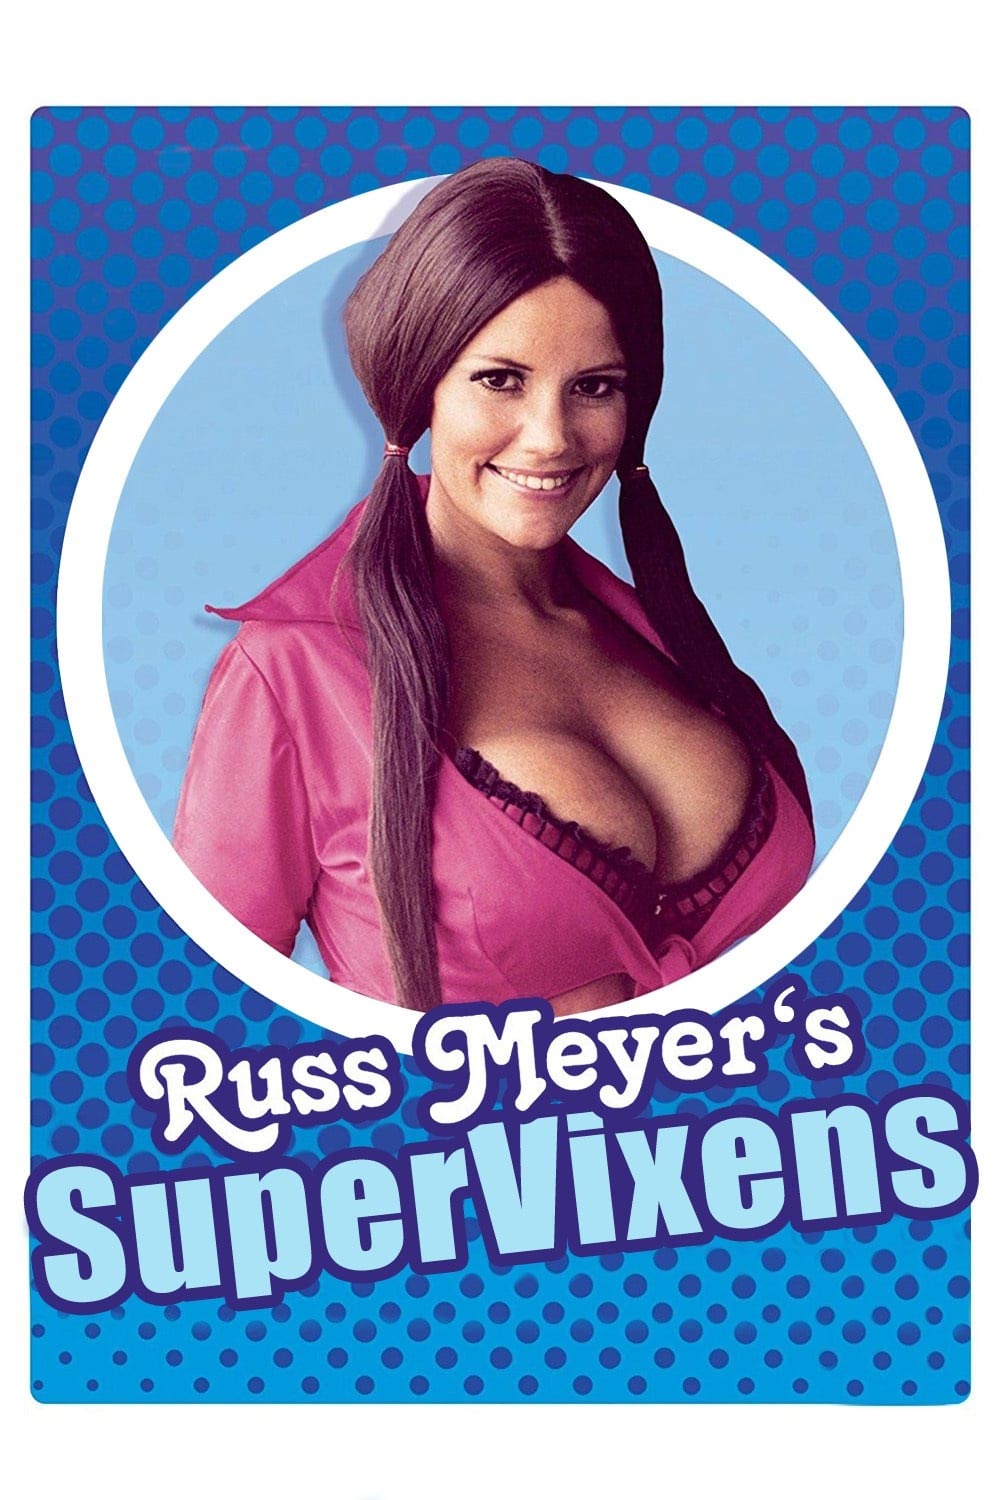 Supervixens (1975) poster